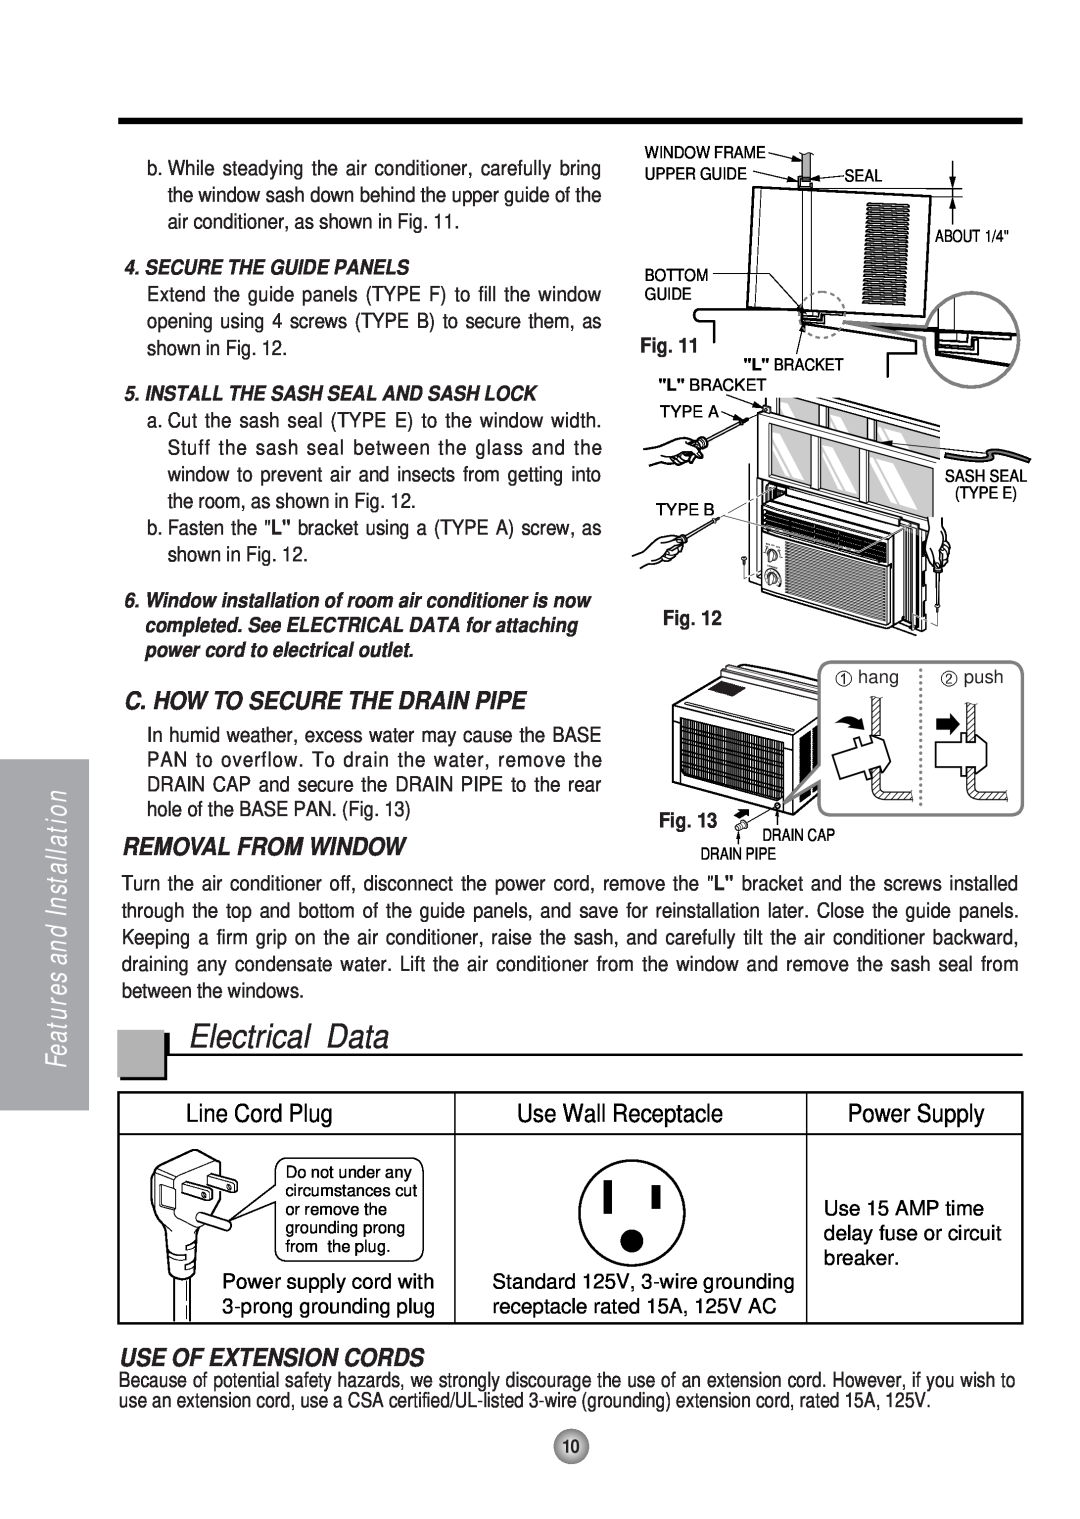 Panasonic HQ-2051RH Electrical Data, C. How To Secure The Drain Pipe, Removal From Window, Line Cord Plug, Power Supply 